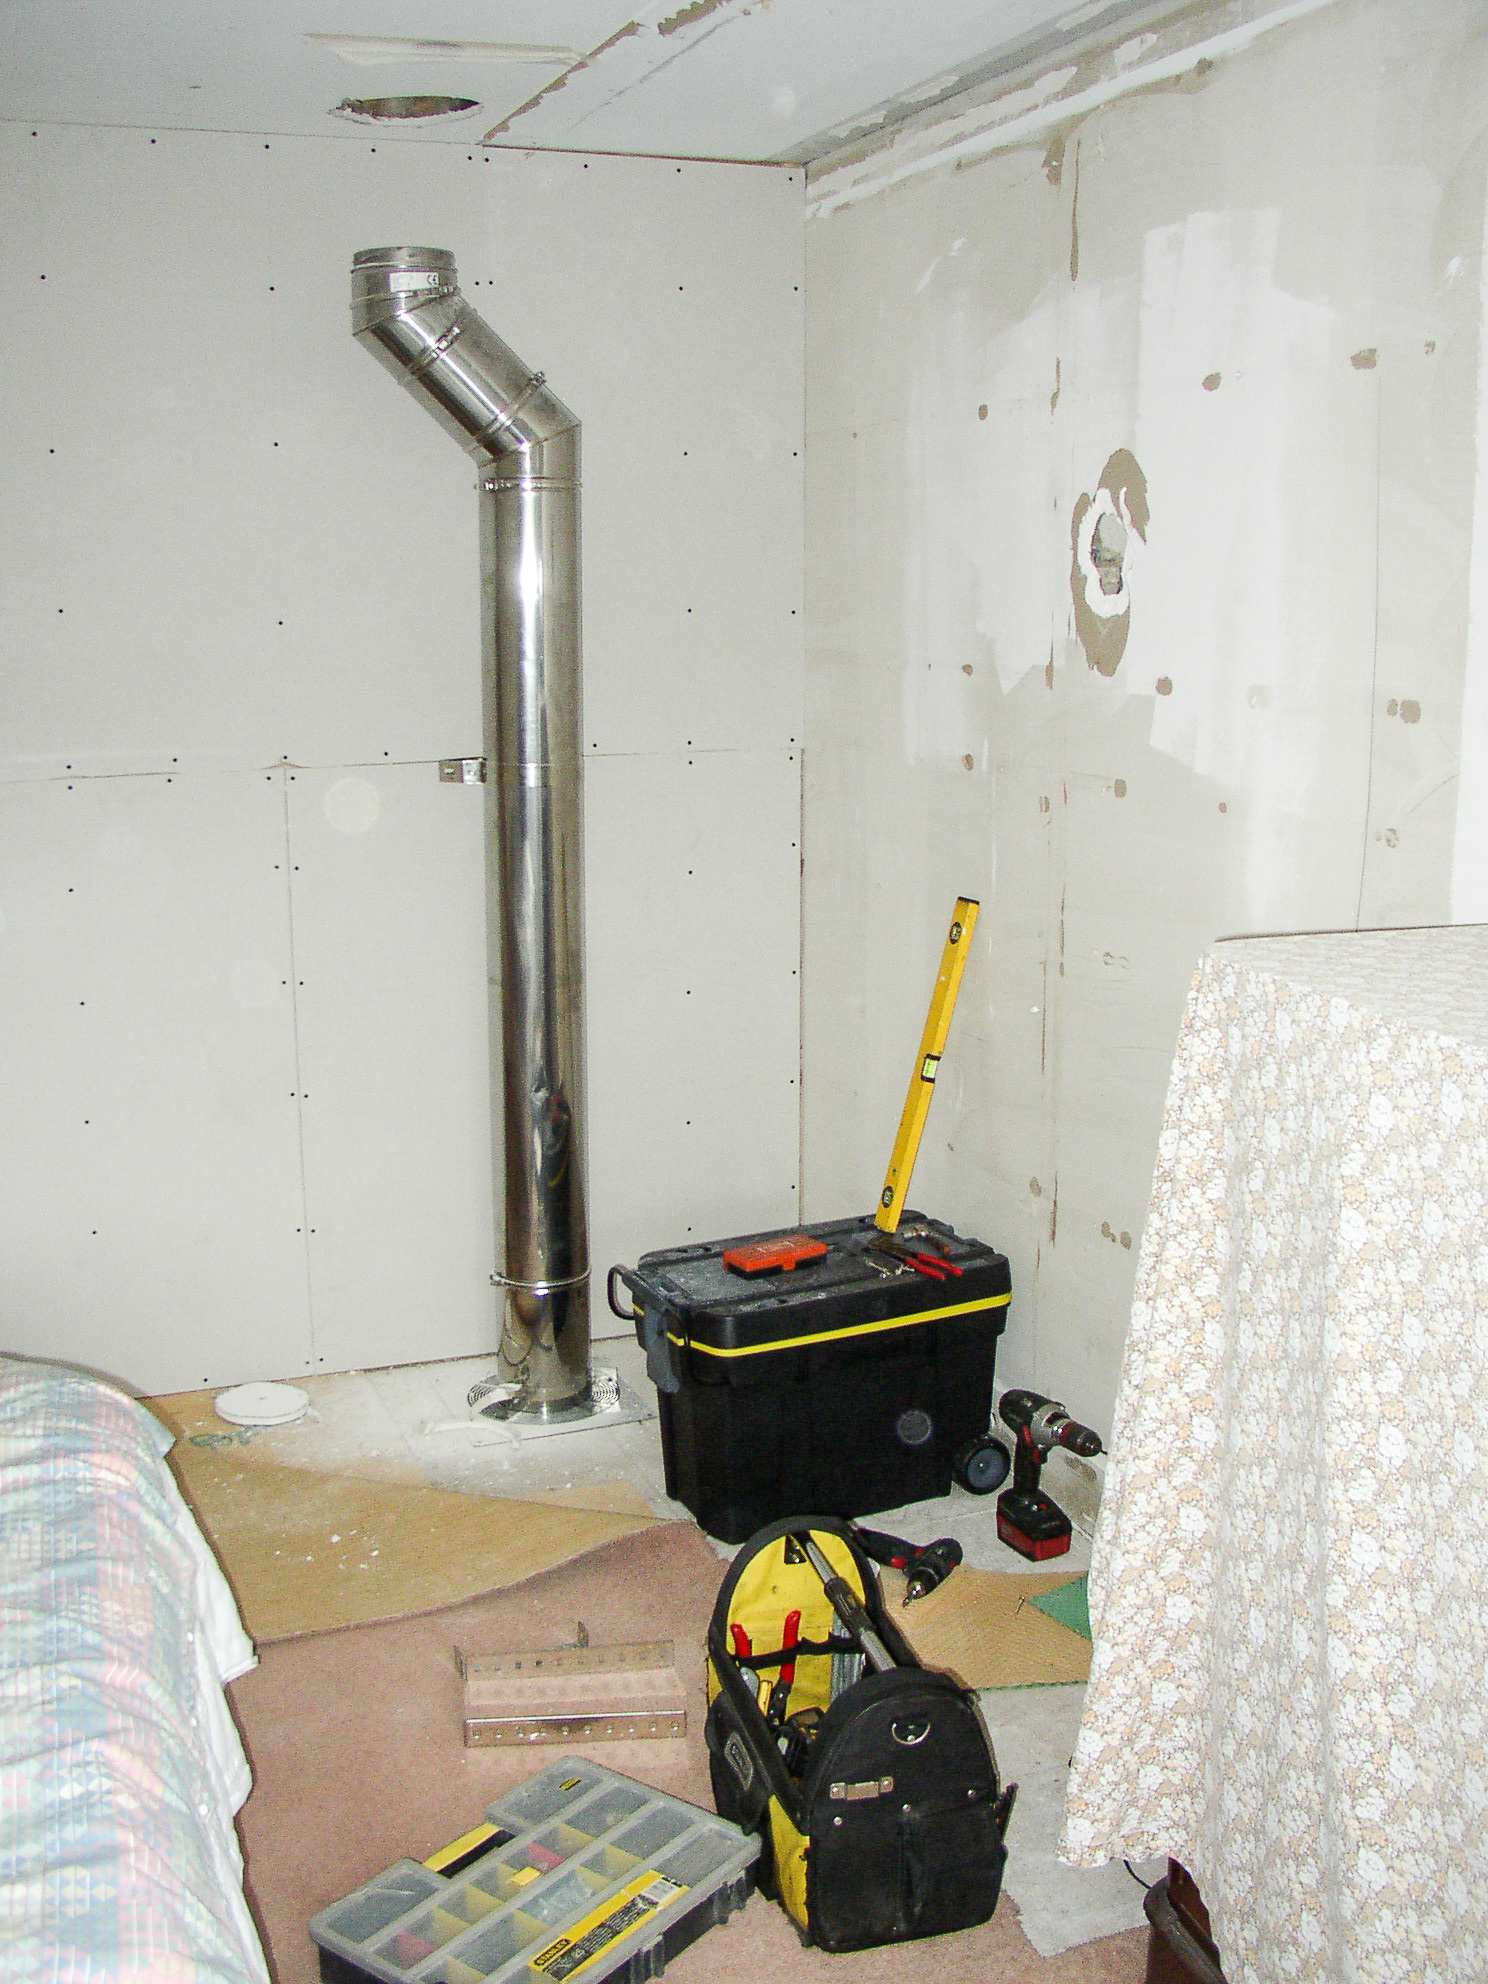 Pipework going through the house